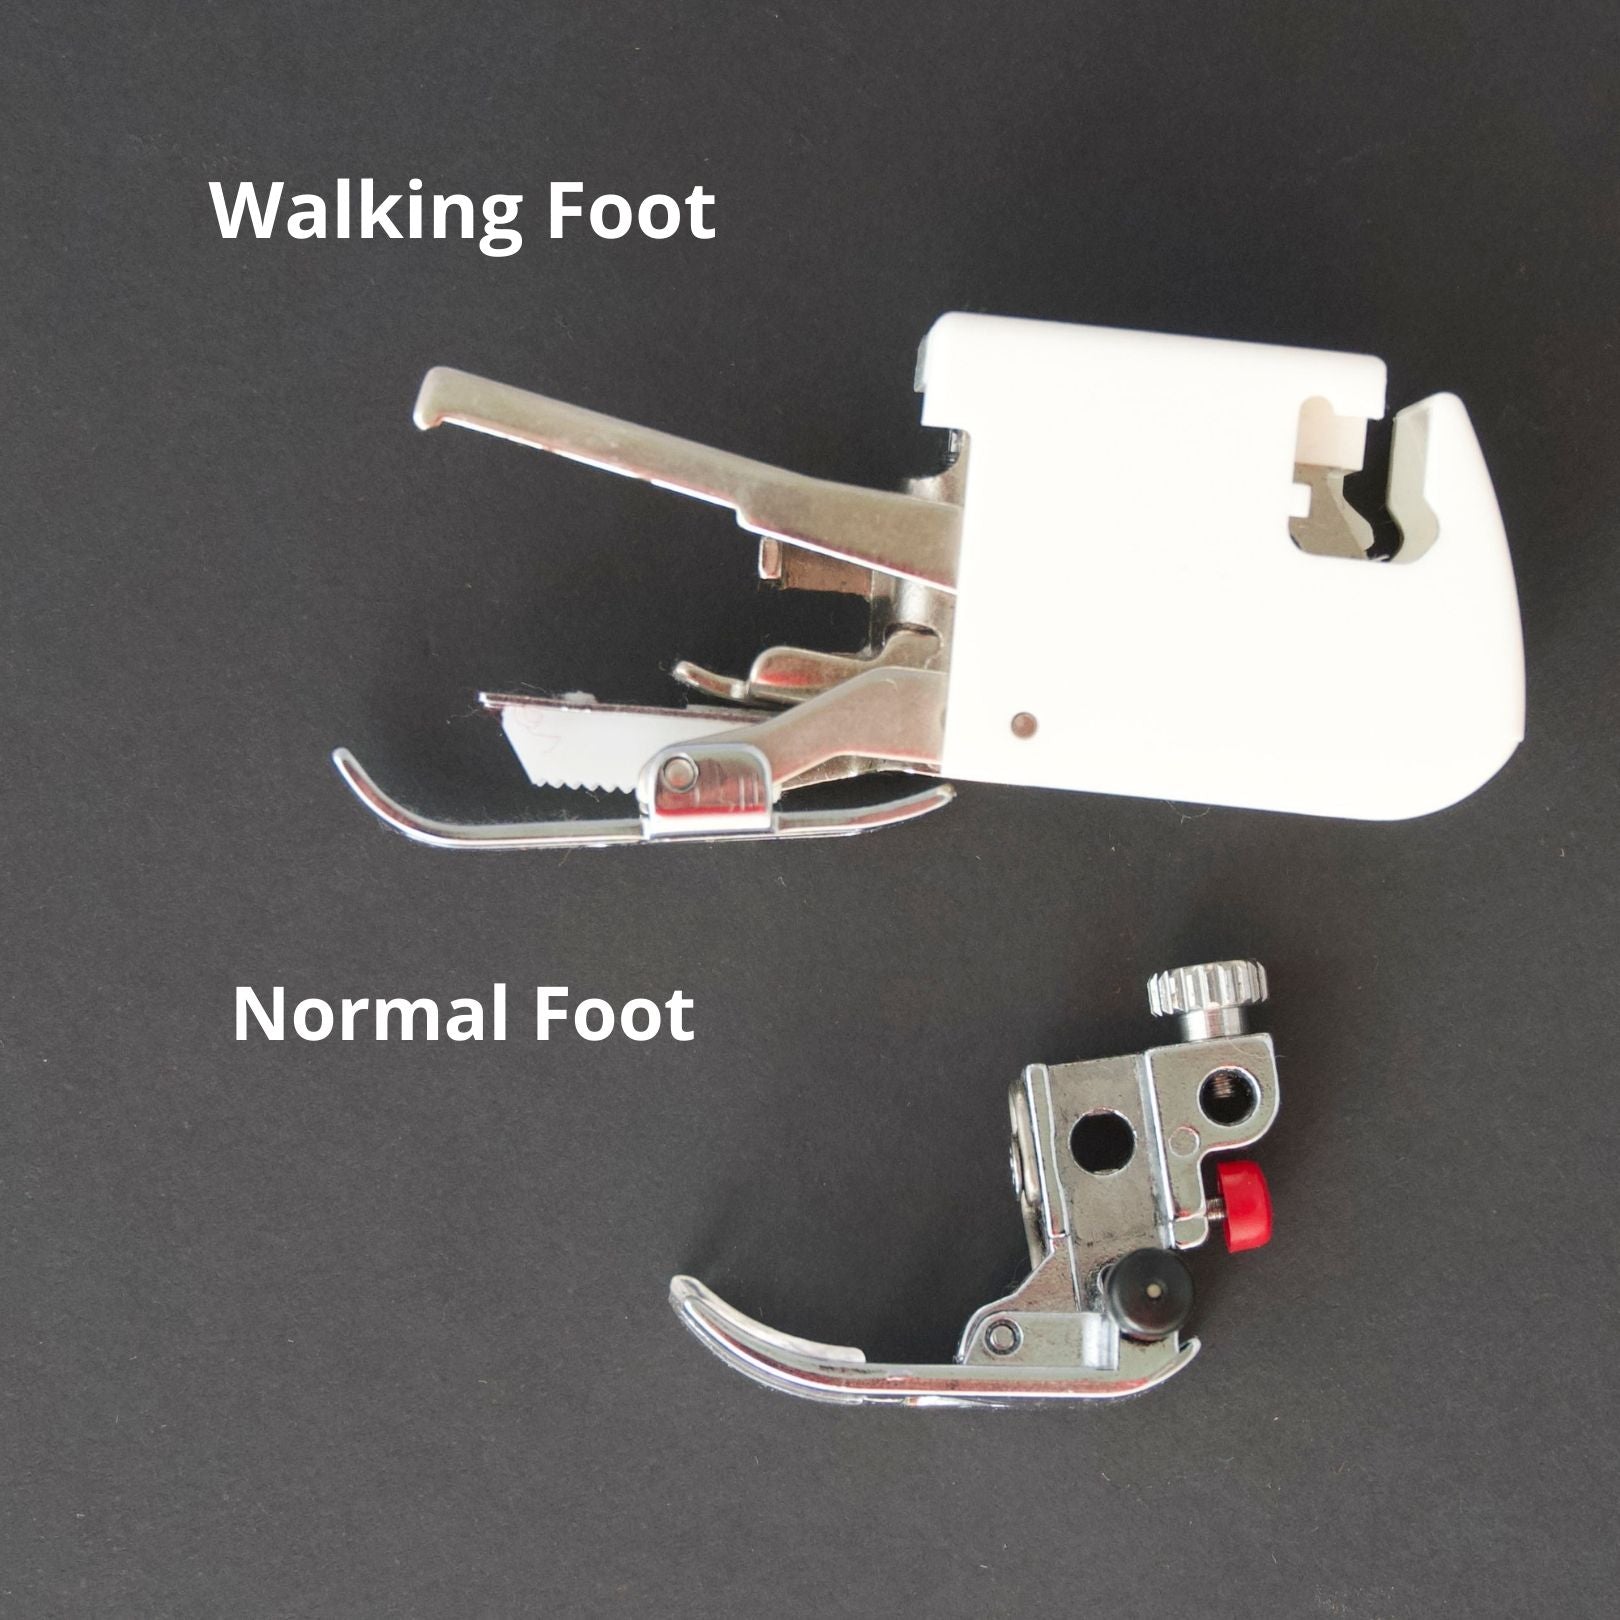 a side by side image of a regular walking foot next to a walking foot. the walking foot has a lever at the front and a rectangle box that you attach to the sewing machine shaft